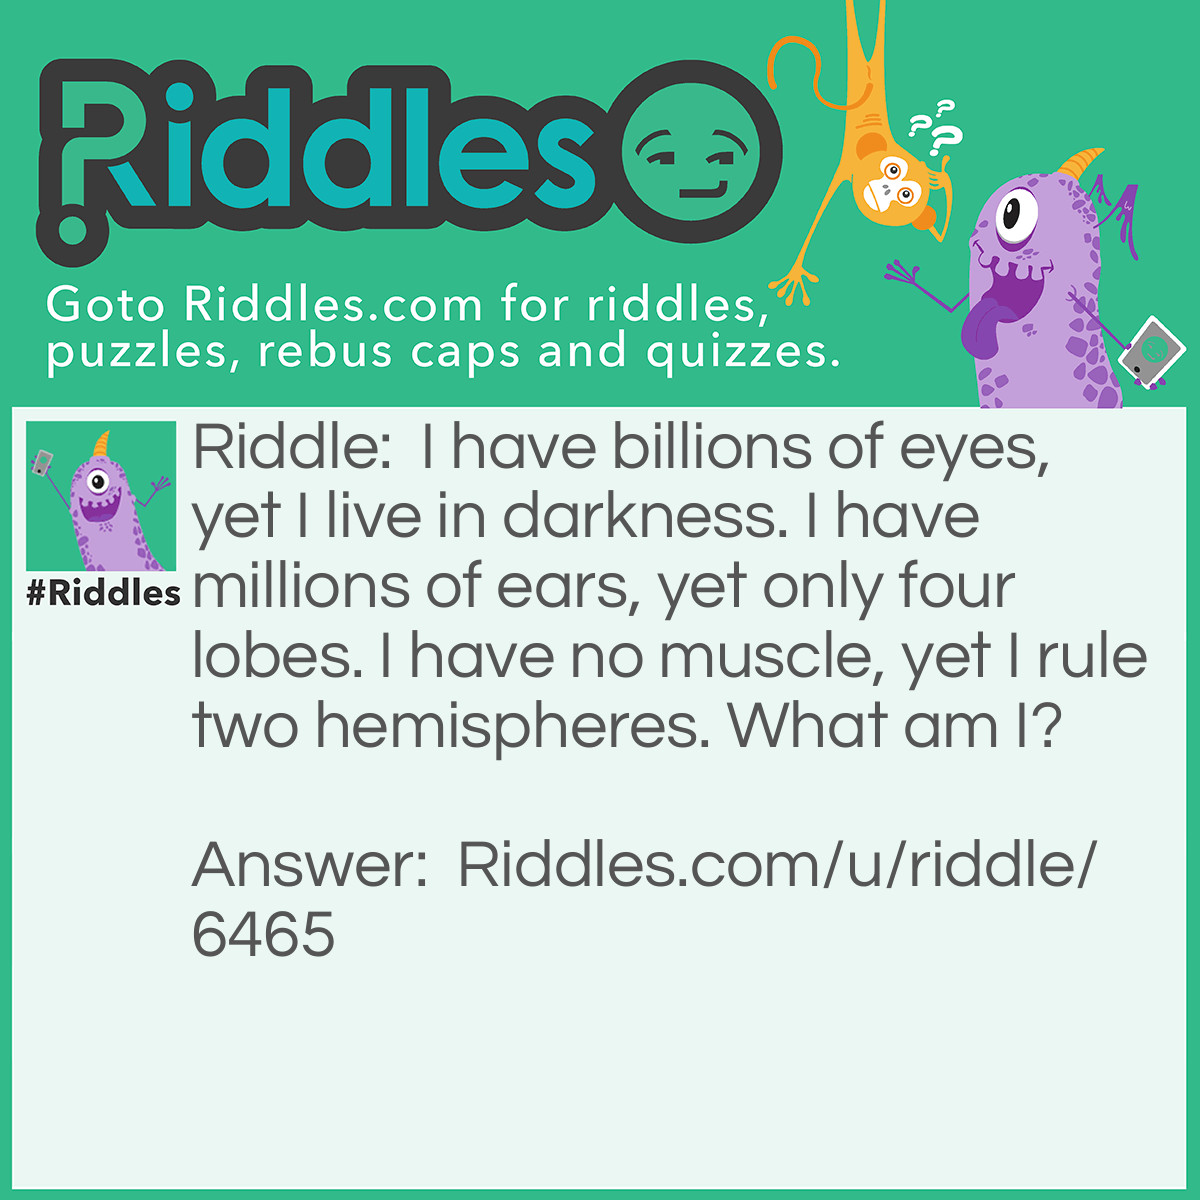 Riddle: I have billions of eyes, yet I live in darkness. I have millions of ears, yet only four lobes. I have no muscle, yet I rule two hemispheres. What am I? Answer: The human brain.